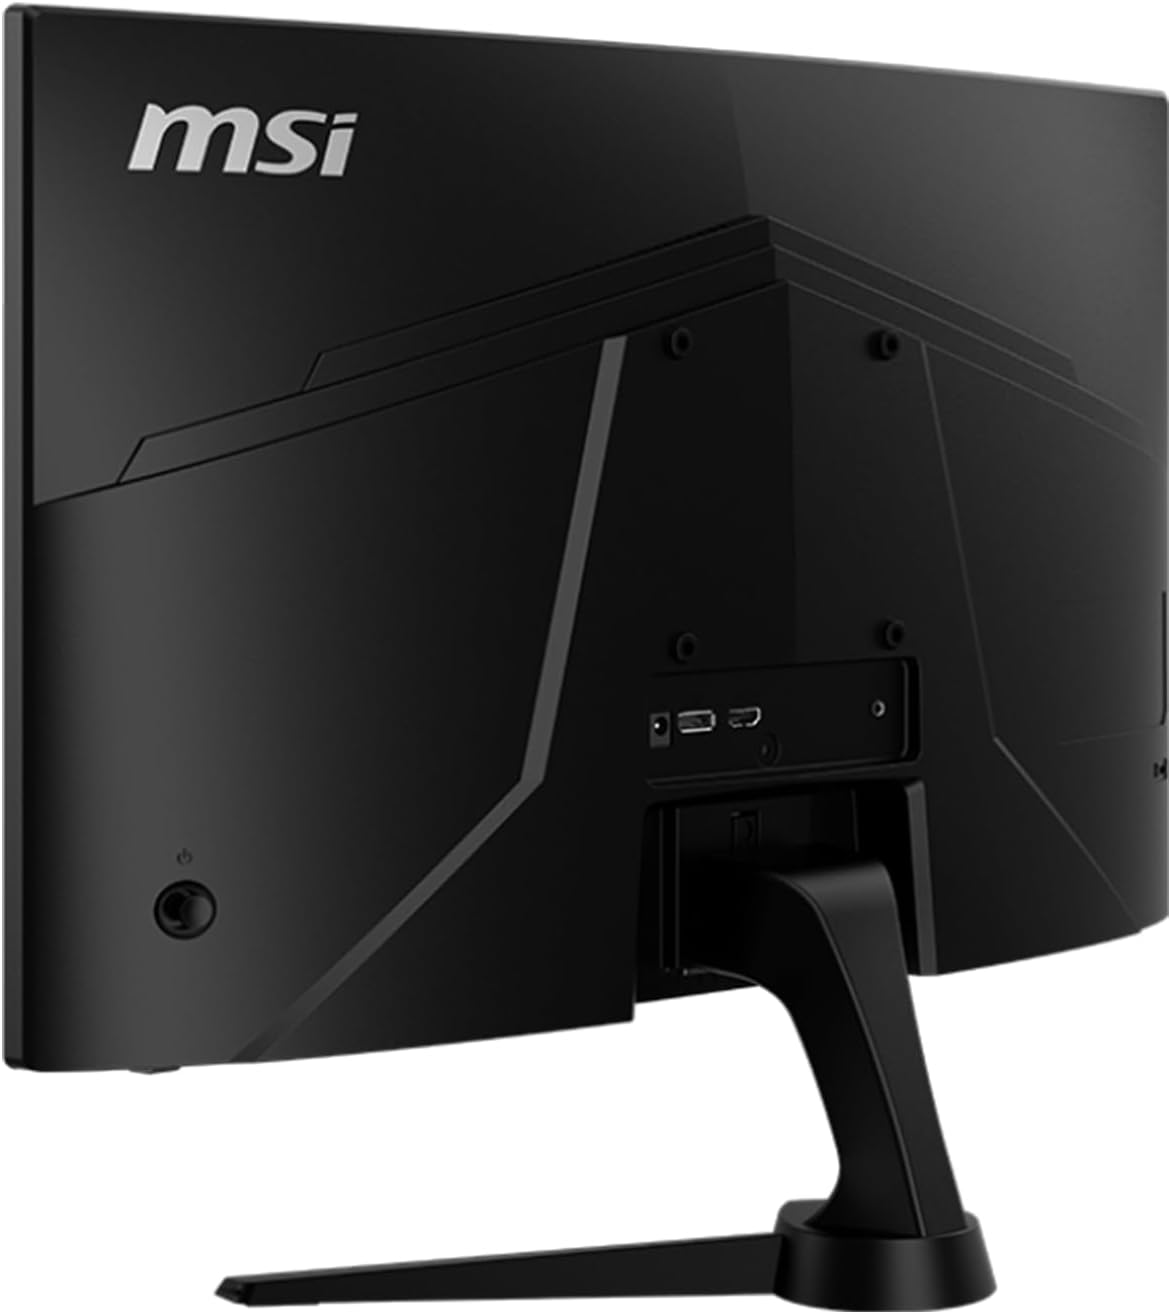 MSI G323CV 32inch Curved 1080P Full HD 75 Hz 1ms LED Backlit LCD Gaming Monitor, 2-Pack Bundle, Frameless, Less Blue Light, FreeSync, HDMI, DisplayPort, Desk Mount Dual Monitor Stand